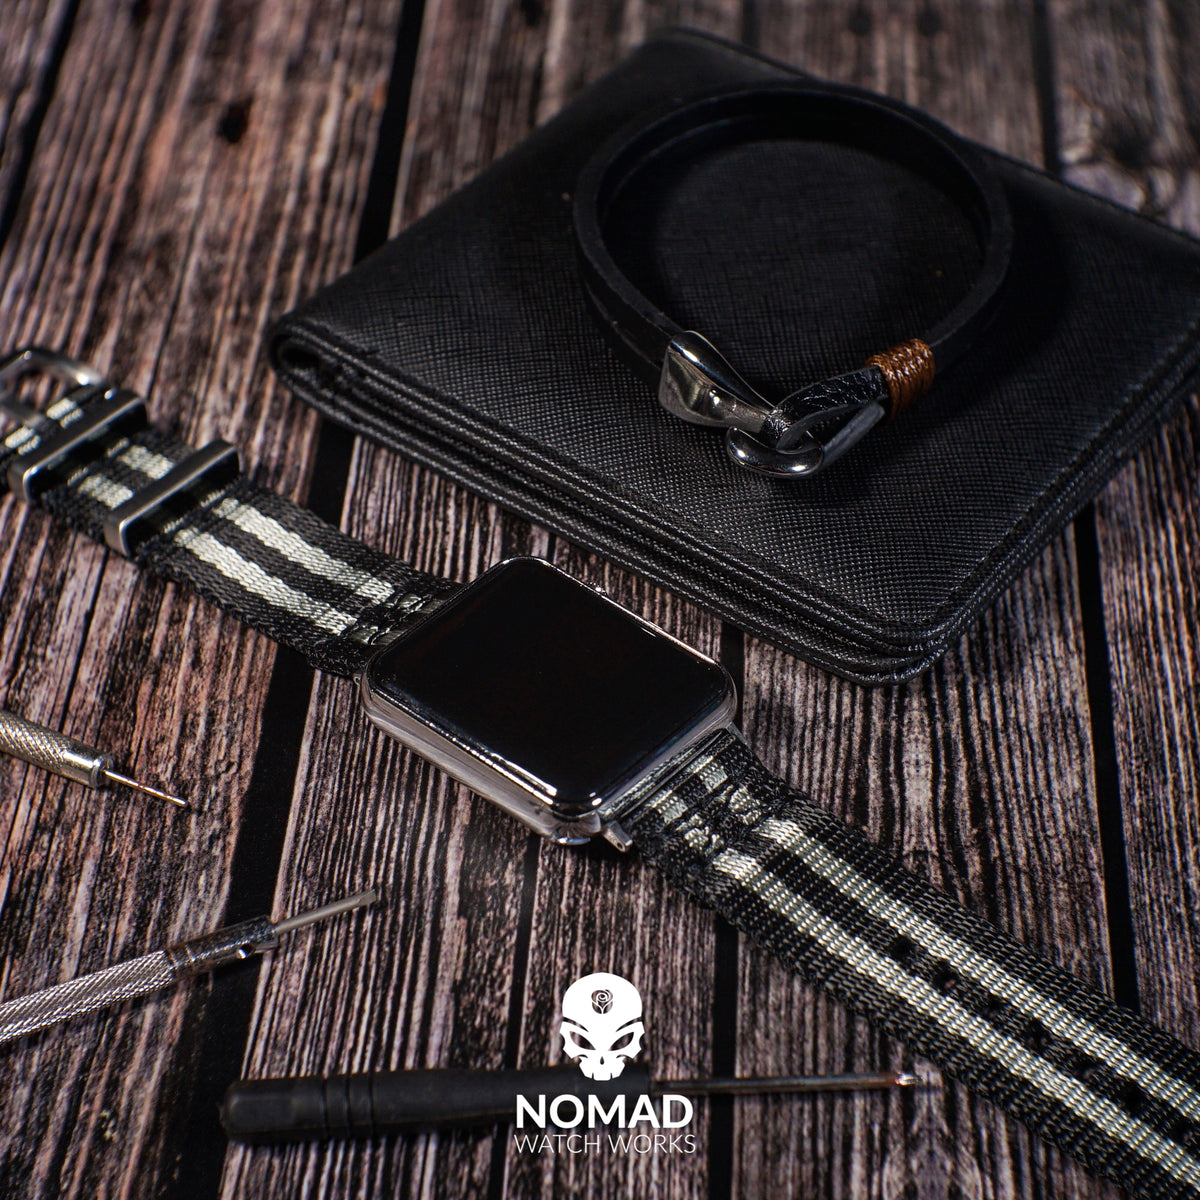 Lincoln Leather Bracelet in Black (Size M) - Nomad Watch Works Malaysia